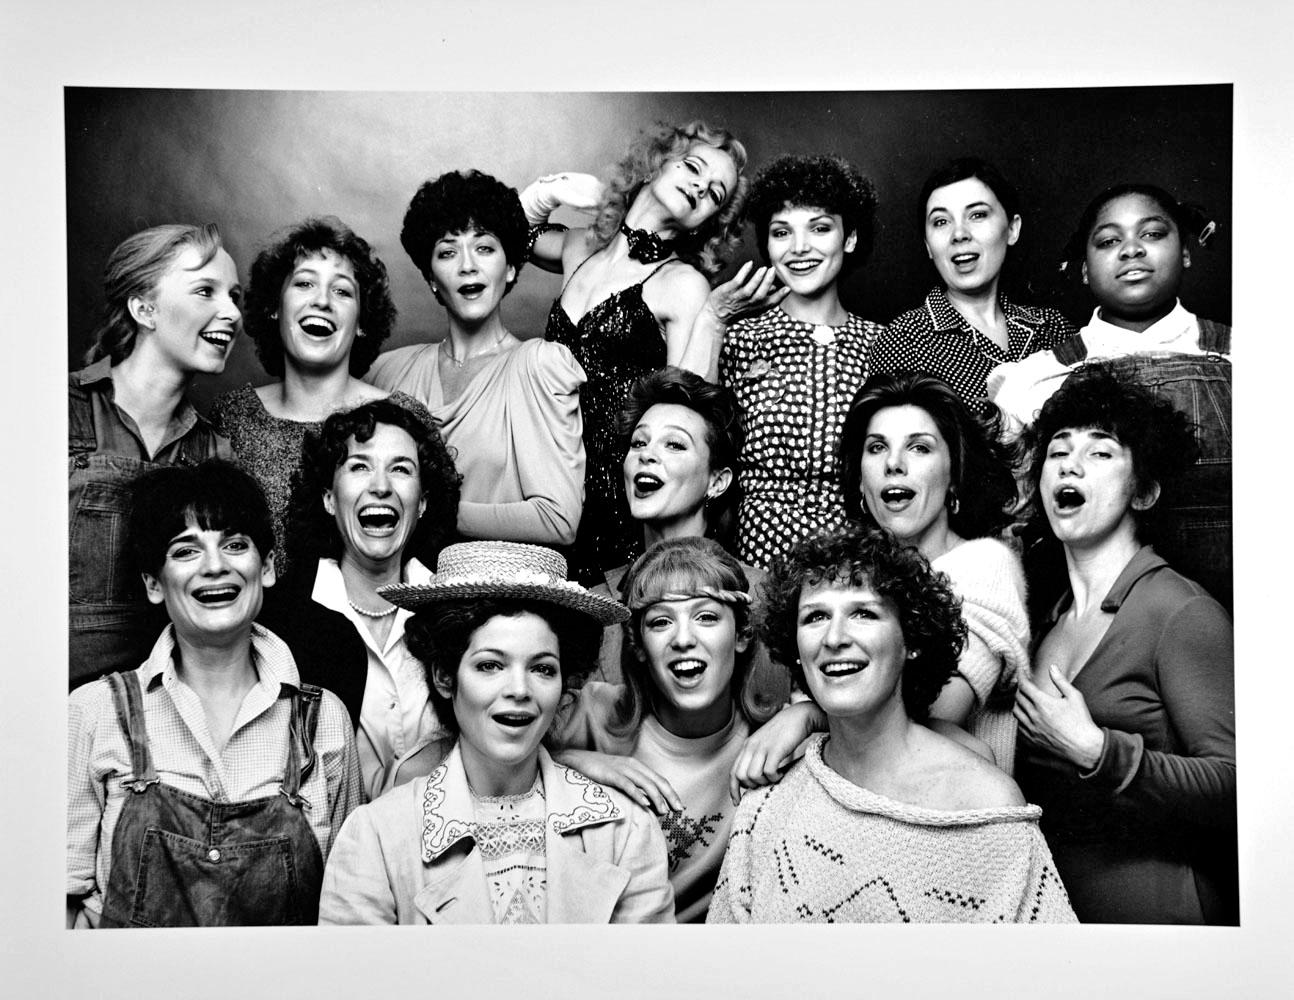 Jack Mitchell Black and White Photograph - Broadway Actresses group shot, Amy Irving, Laura Dean, Glenn Close